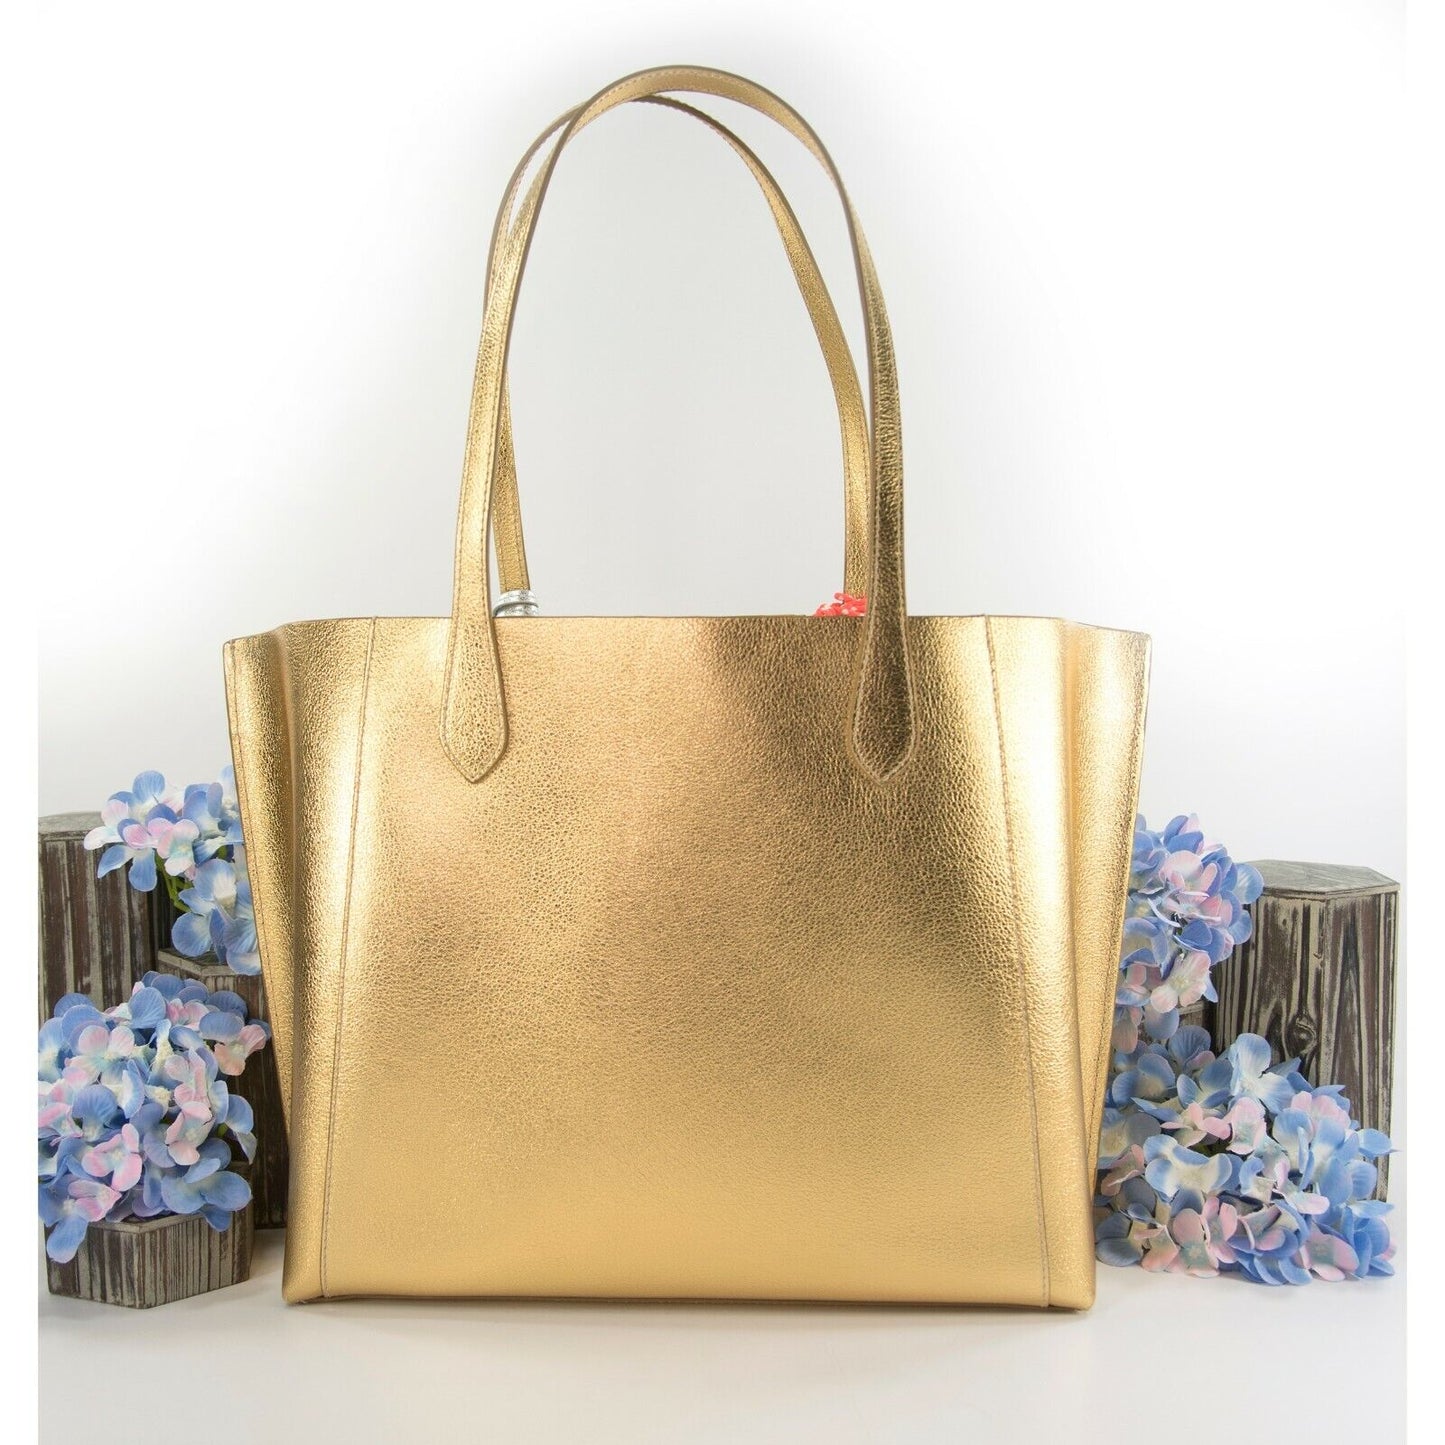 Sophia Webster Hola Gold Silver Metallic Leather Butterfly Tote Bag NWT